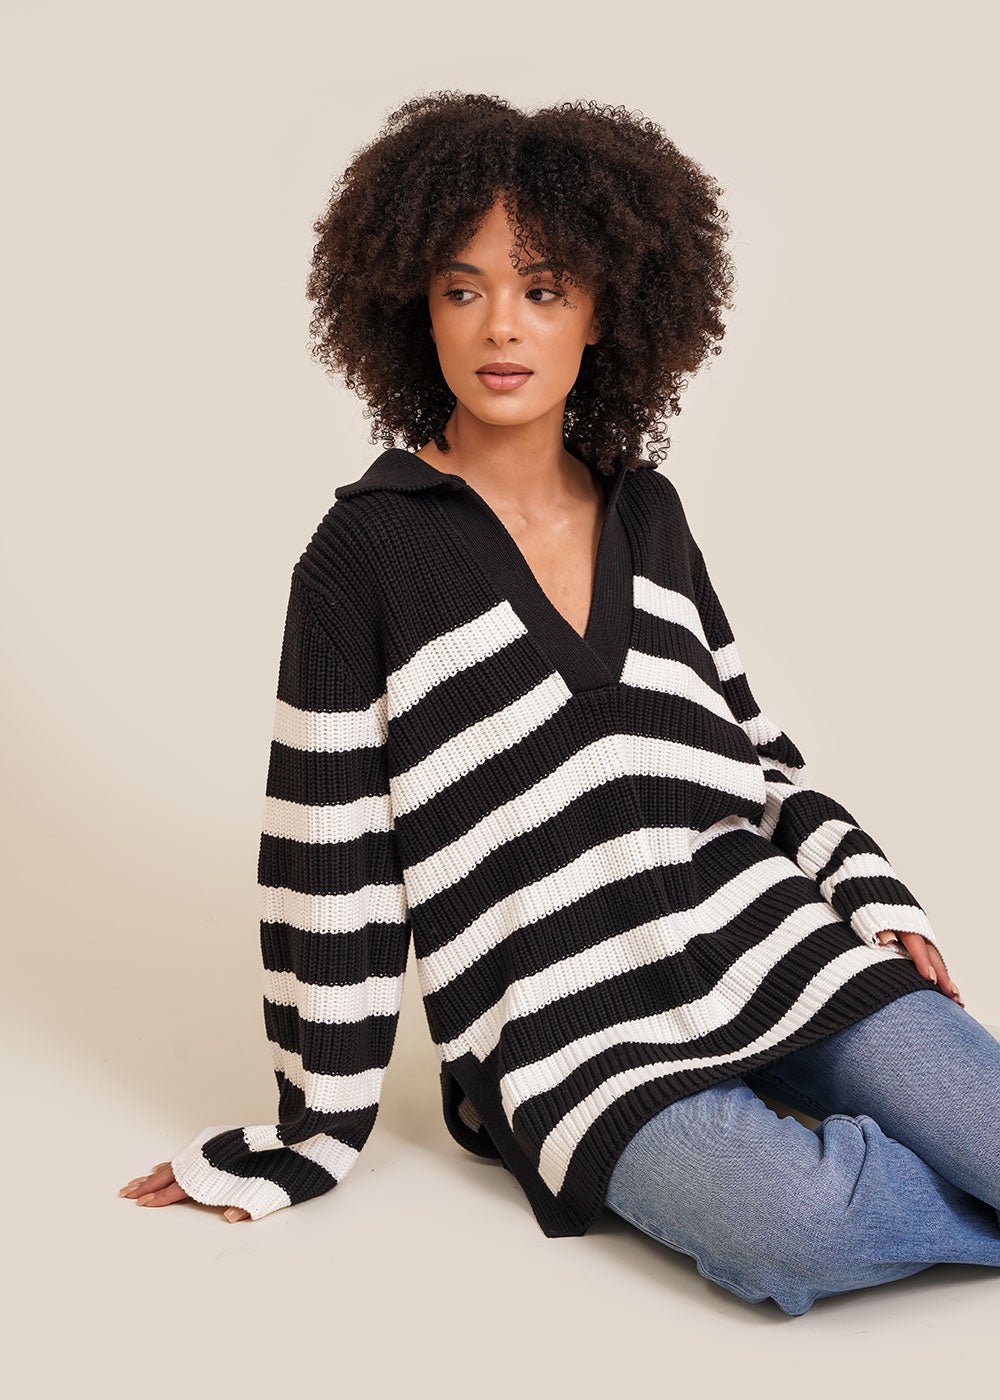 Stylein Striped Arien Sweater - New Classics Studios Sustainable Ethical Fashion Canada